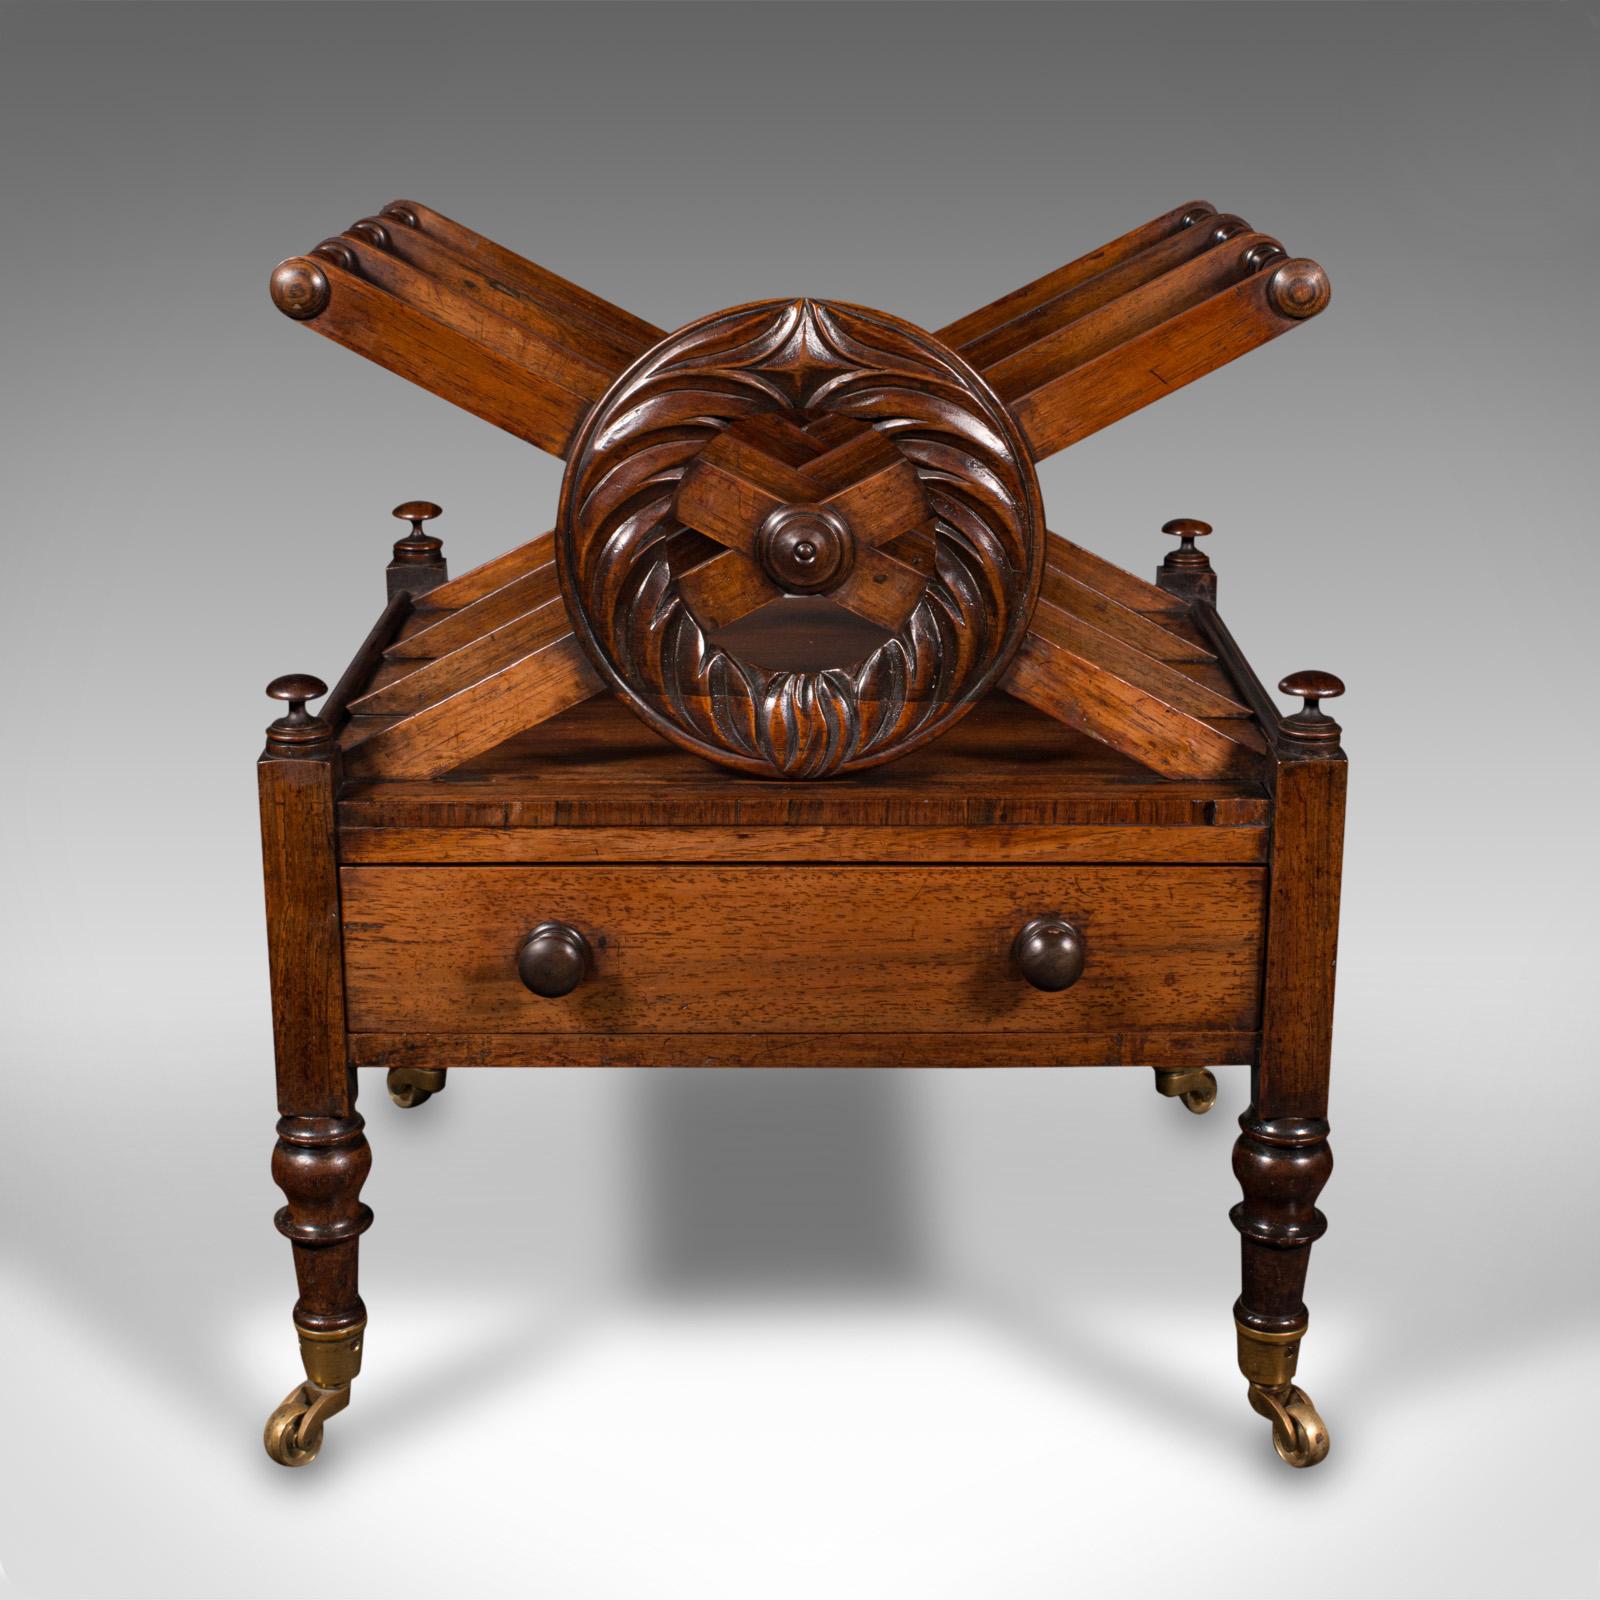 This is an antique Canterbury. An English, rosewood three sectioned magazine stand or newspaper rack, dating to the Regency period, circa 1820.

Wonderful craftsmanship, adding distinction to any room
Displays a desirable aged patina and in good